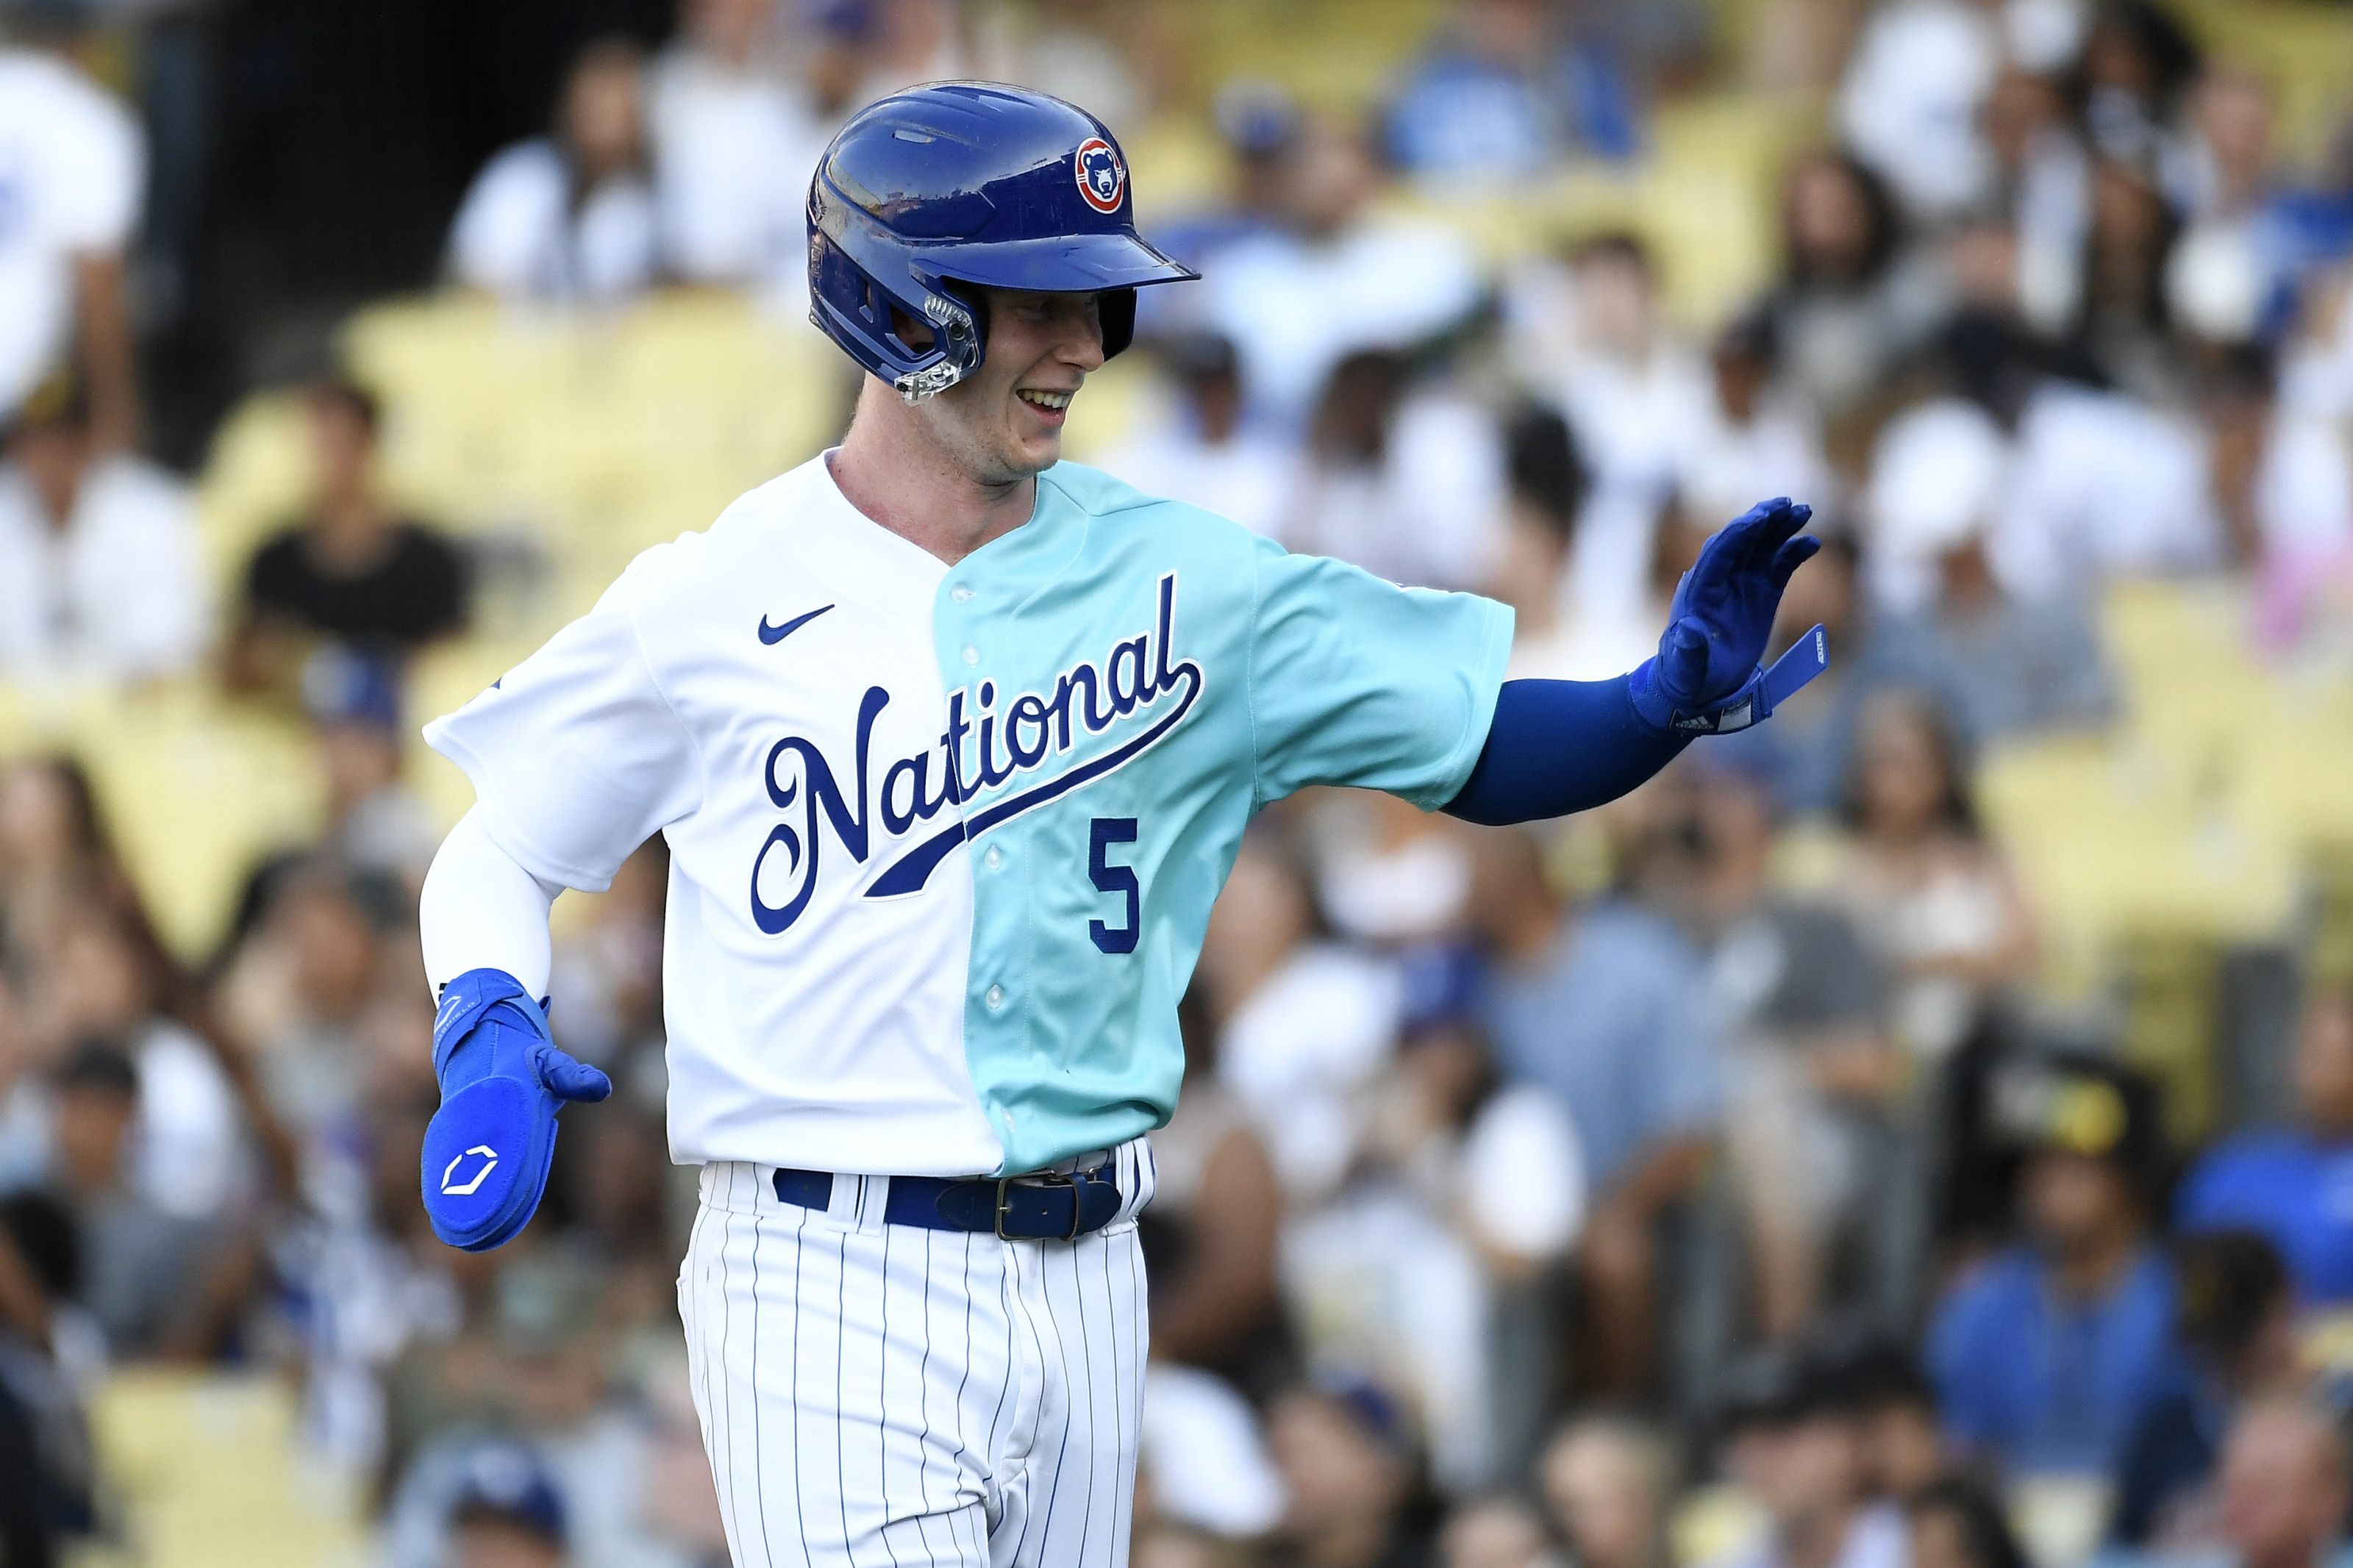 Chicago Cubs on X: The #Cubs today made the following roster